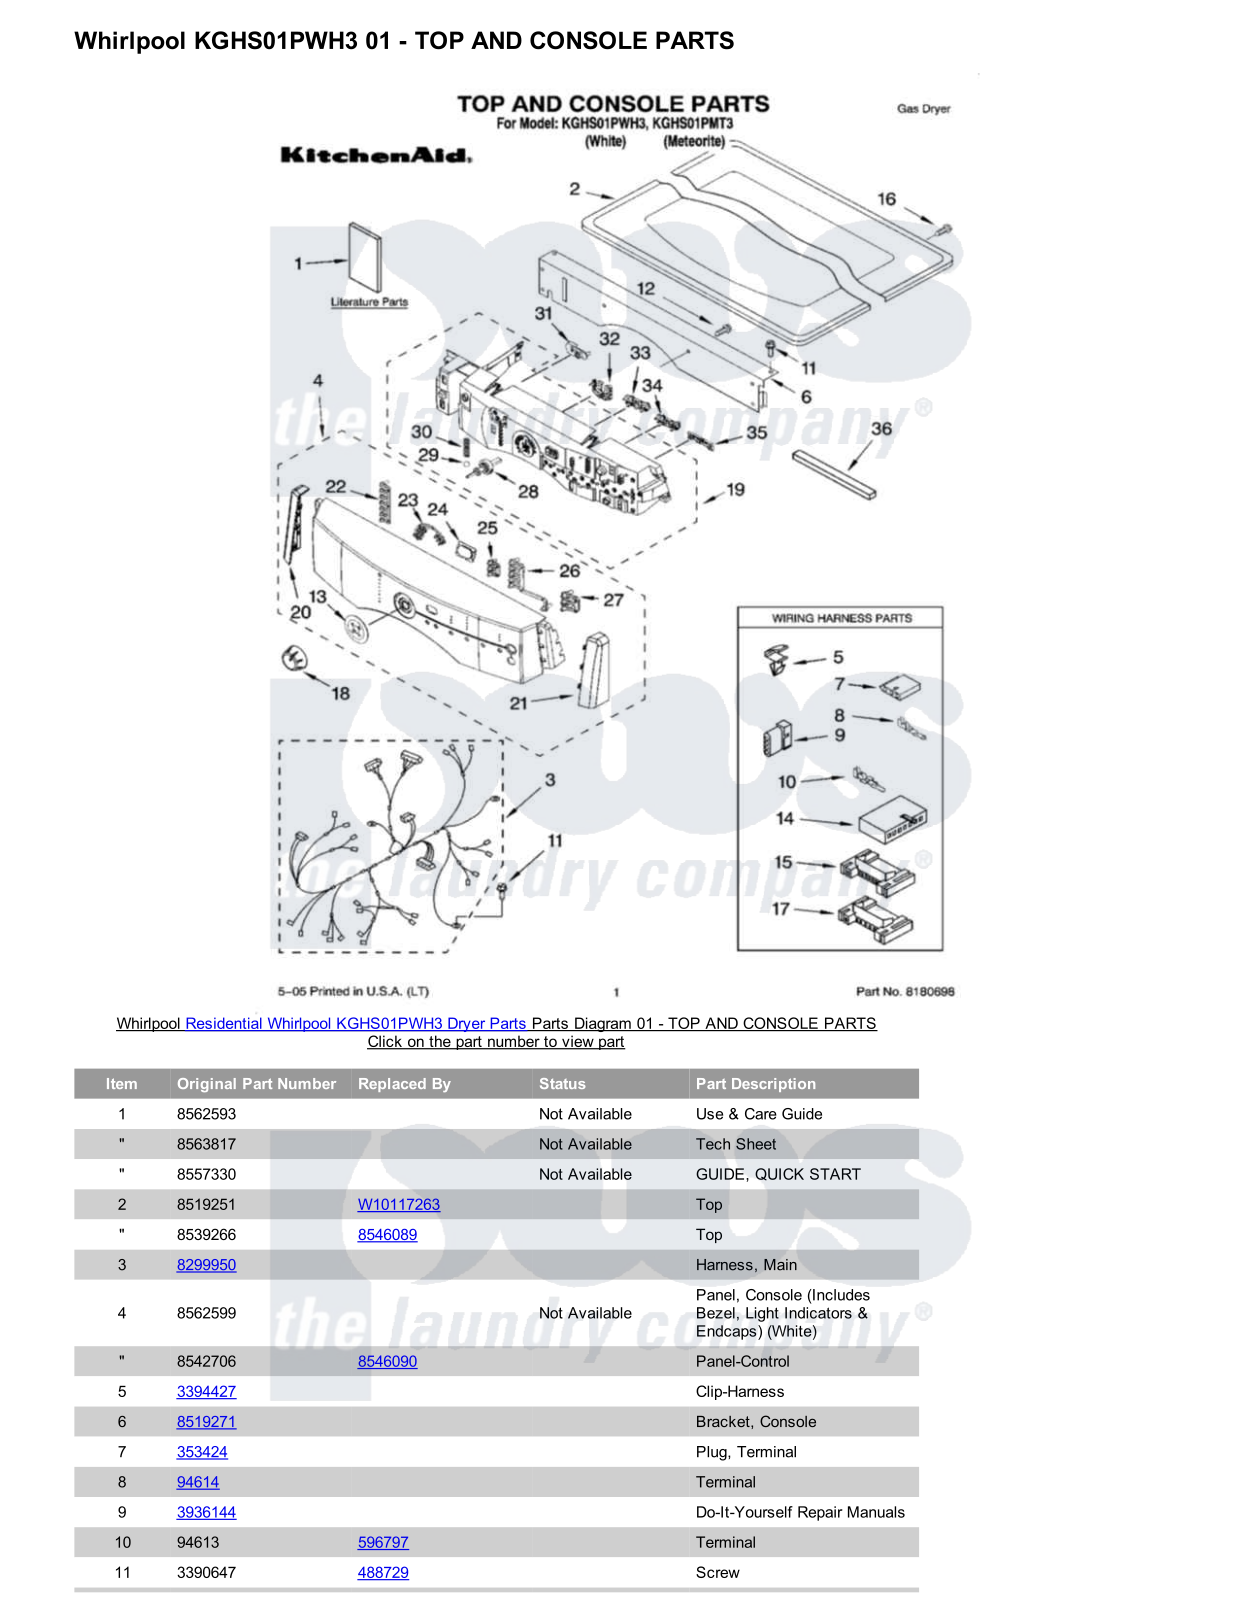 Whirlpool KGHS01PWH3 Parts Diagram